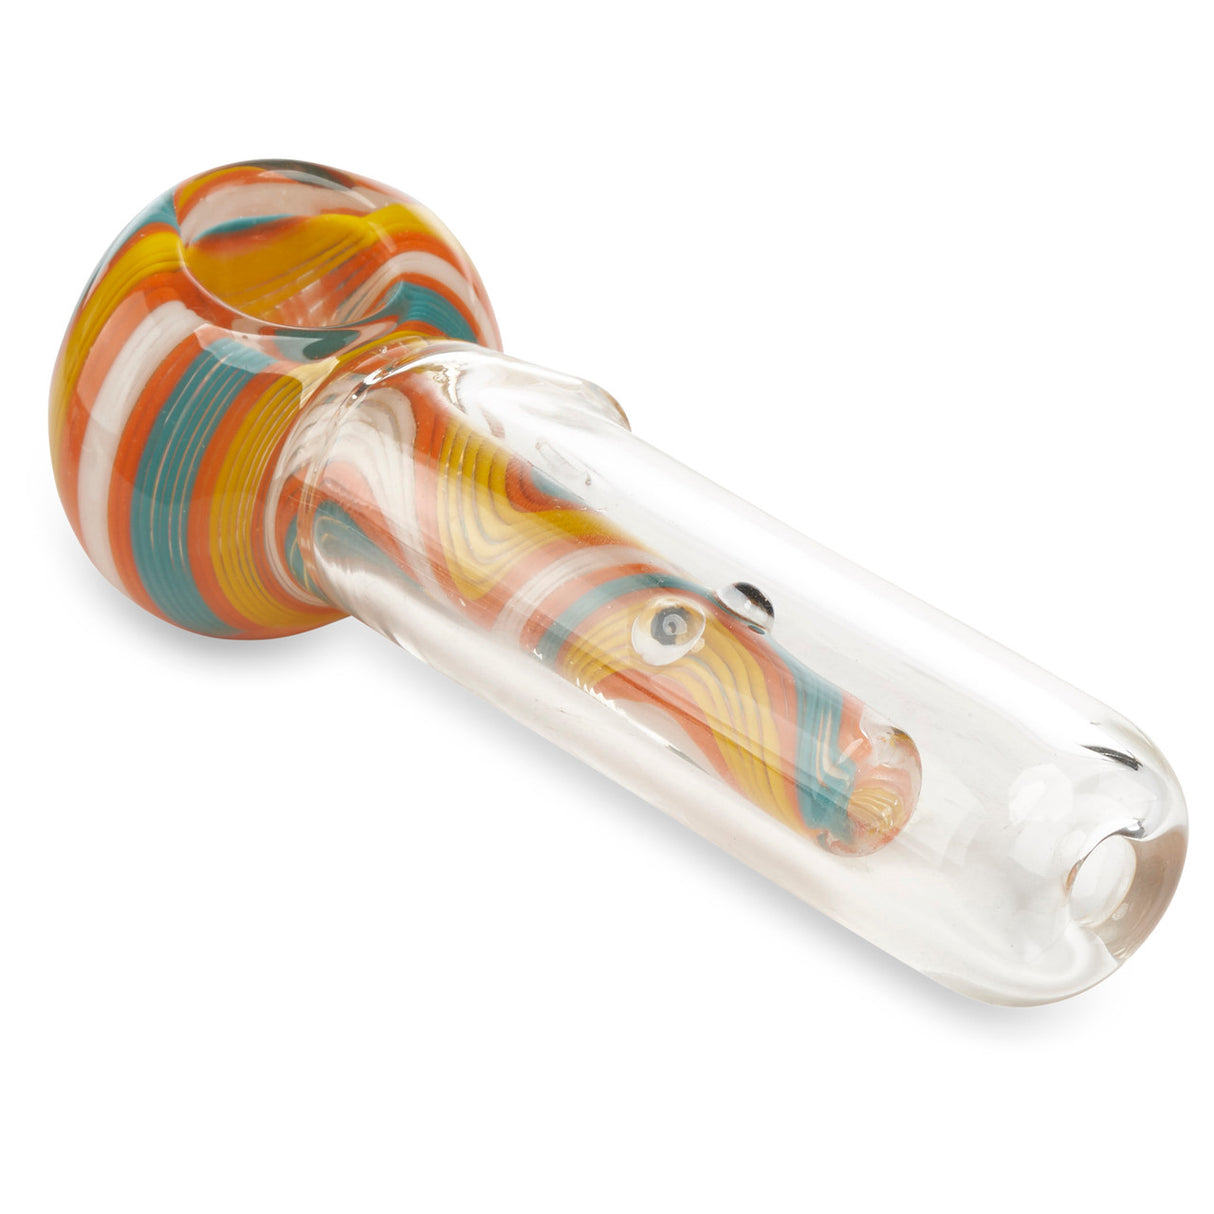 Pioneer trapped in a tube spoon hand pipe glass bowl online